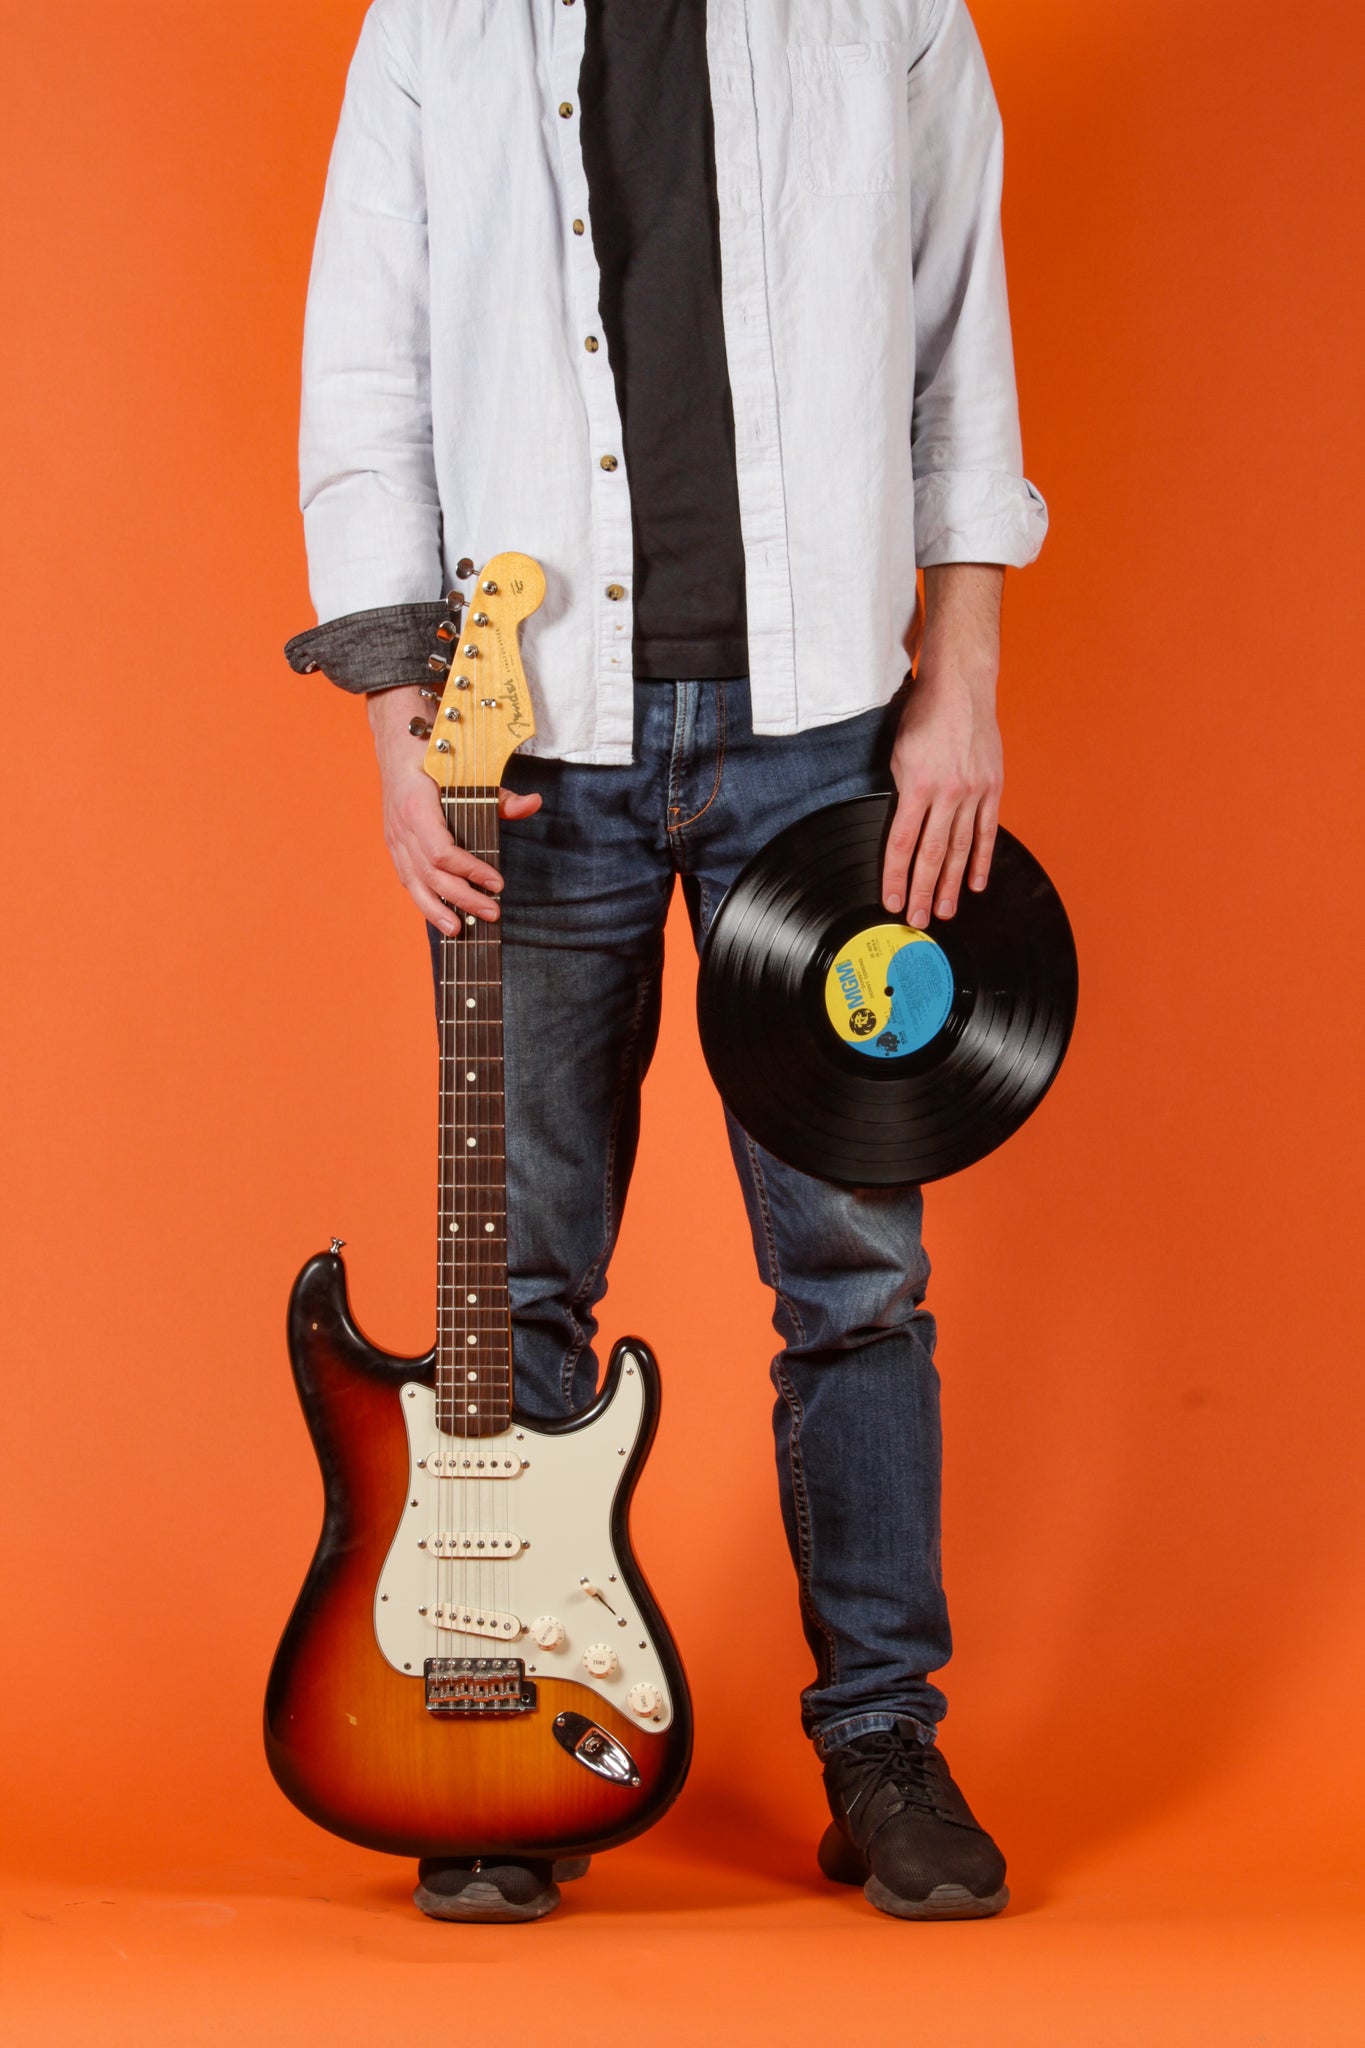 person holding a guitar and a record standing in front of an orange background